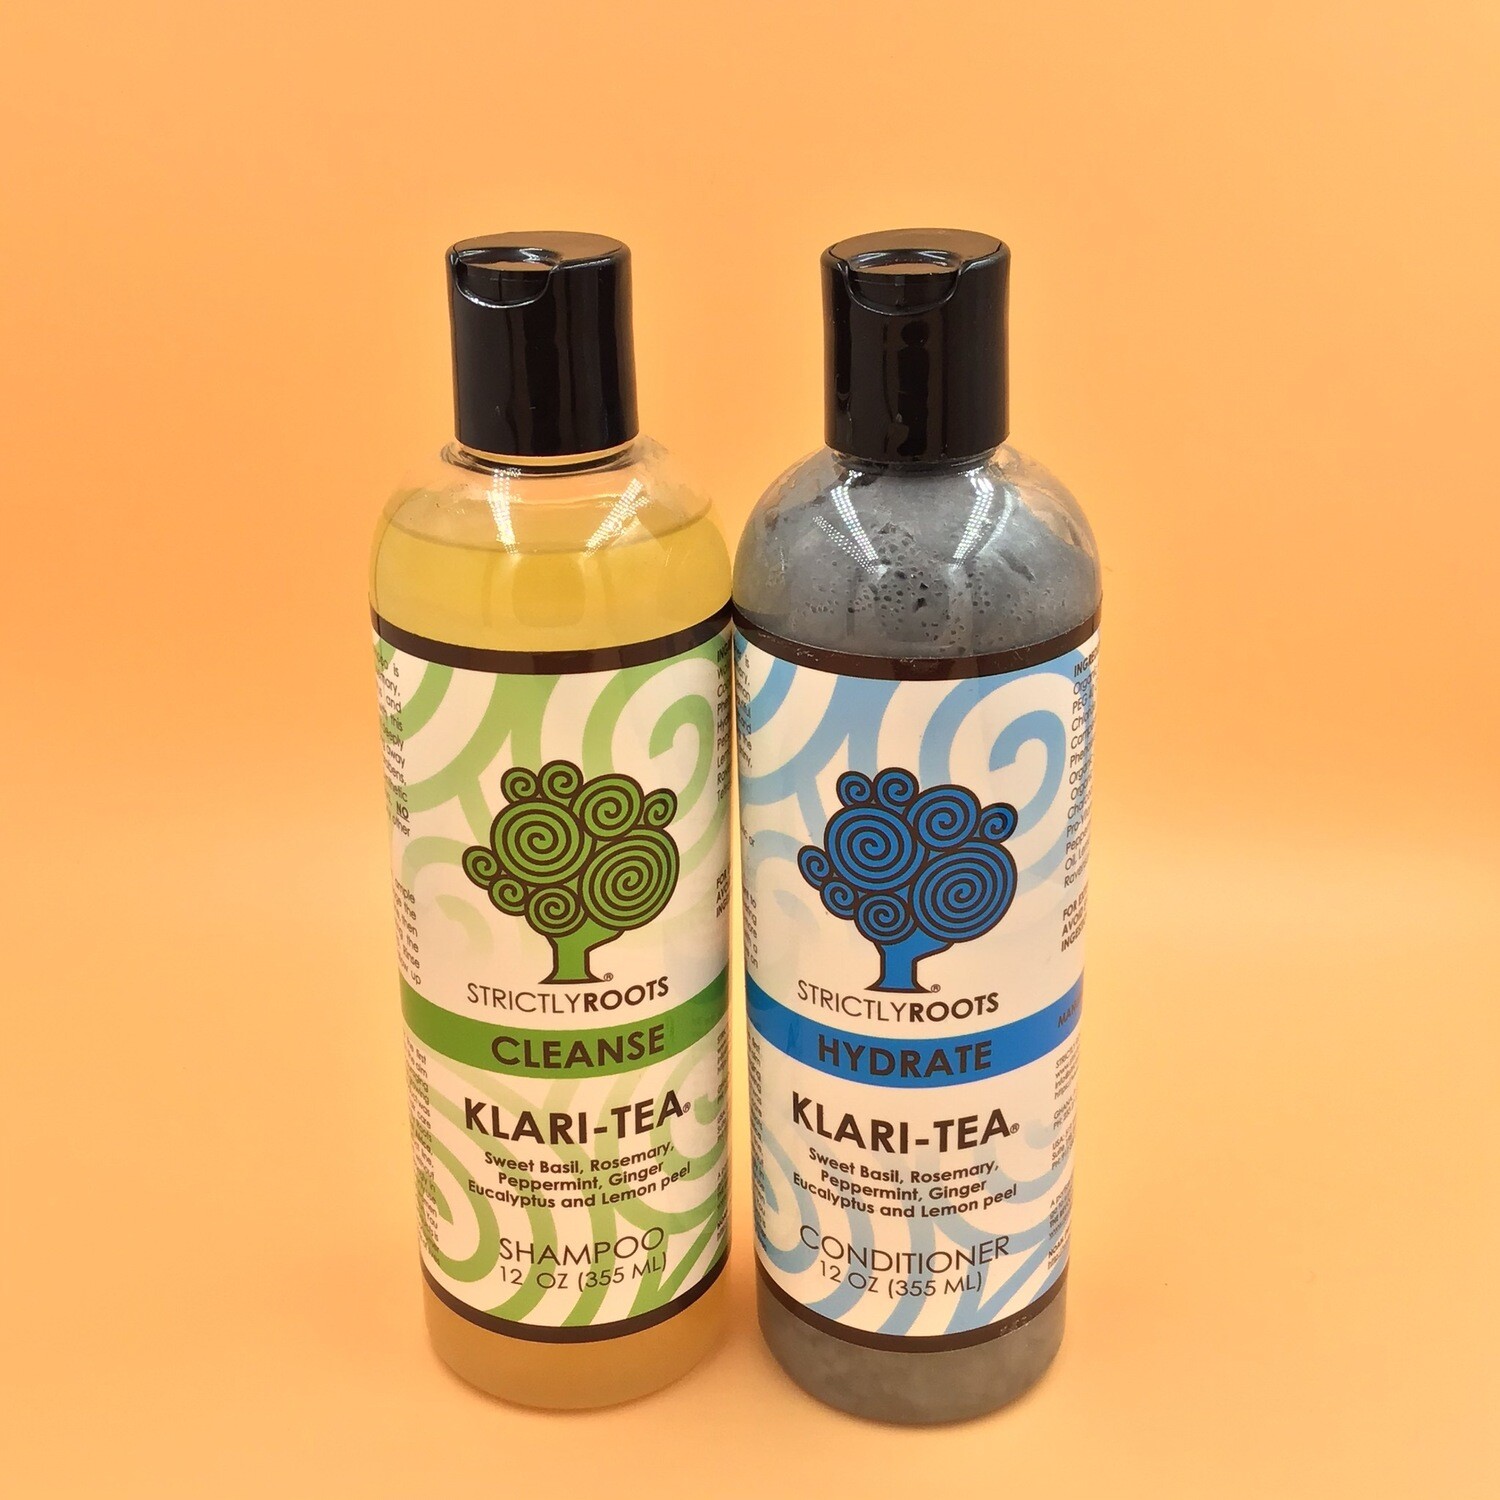 LIMITED TIME ONLY Klari-Tea Cleanse Shampoo & Hydrate Conditioner 12 Oz.